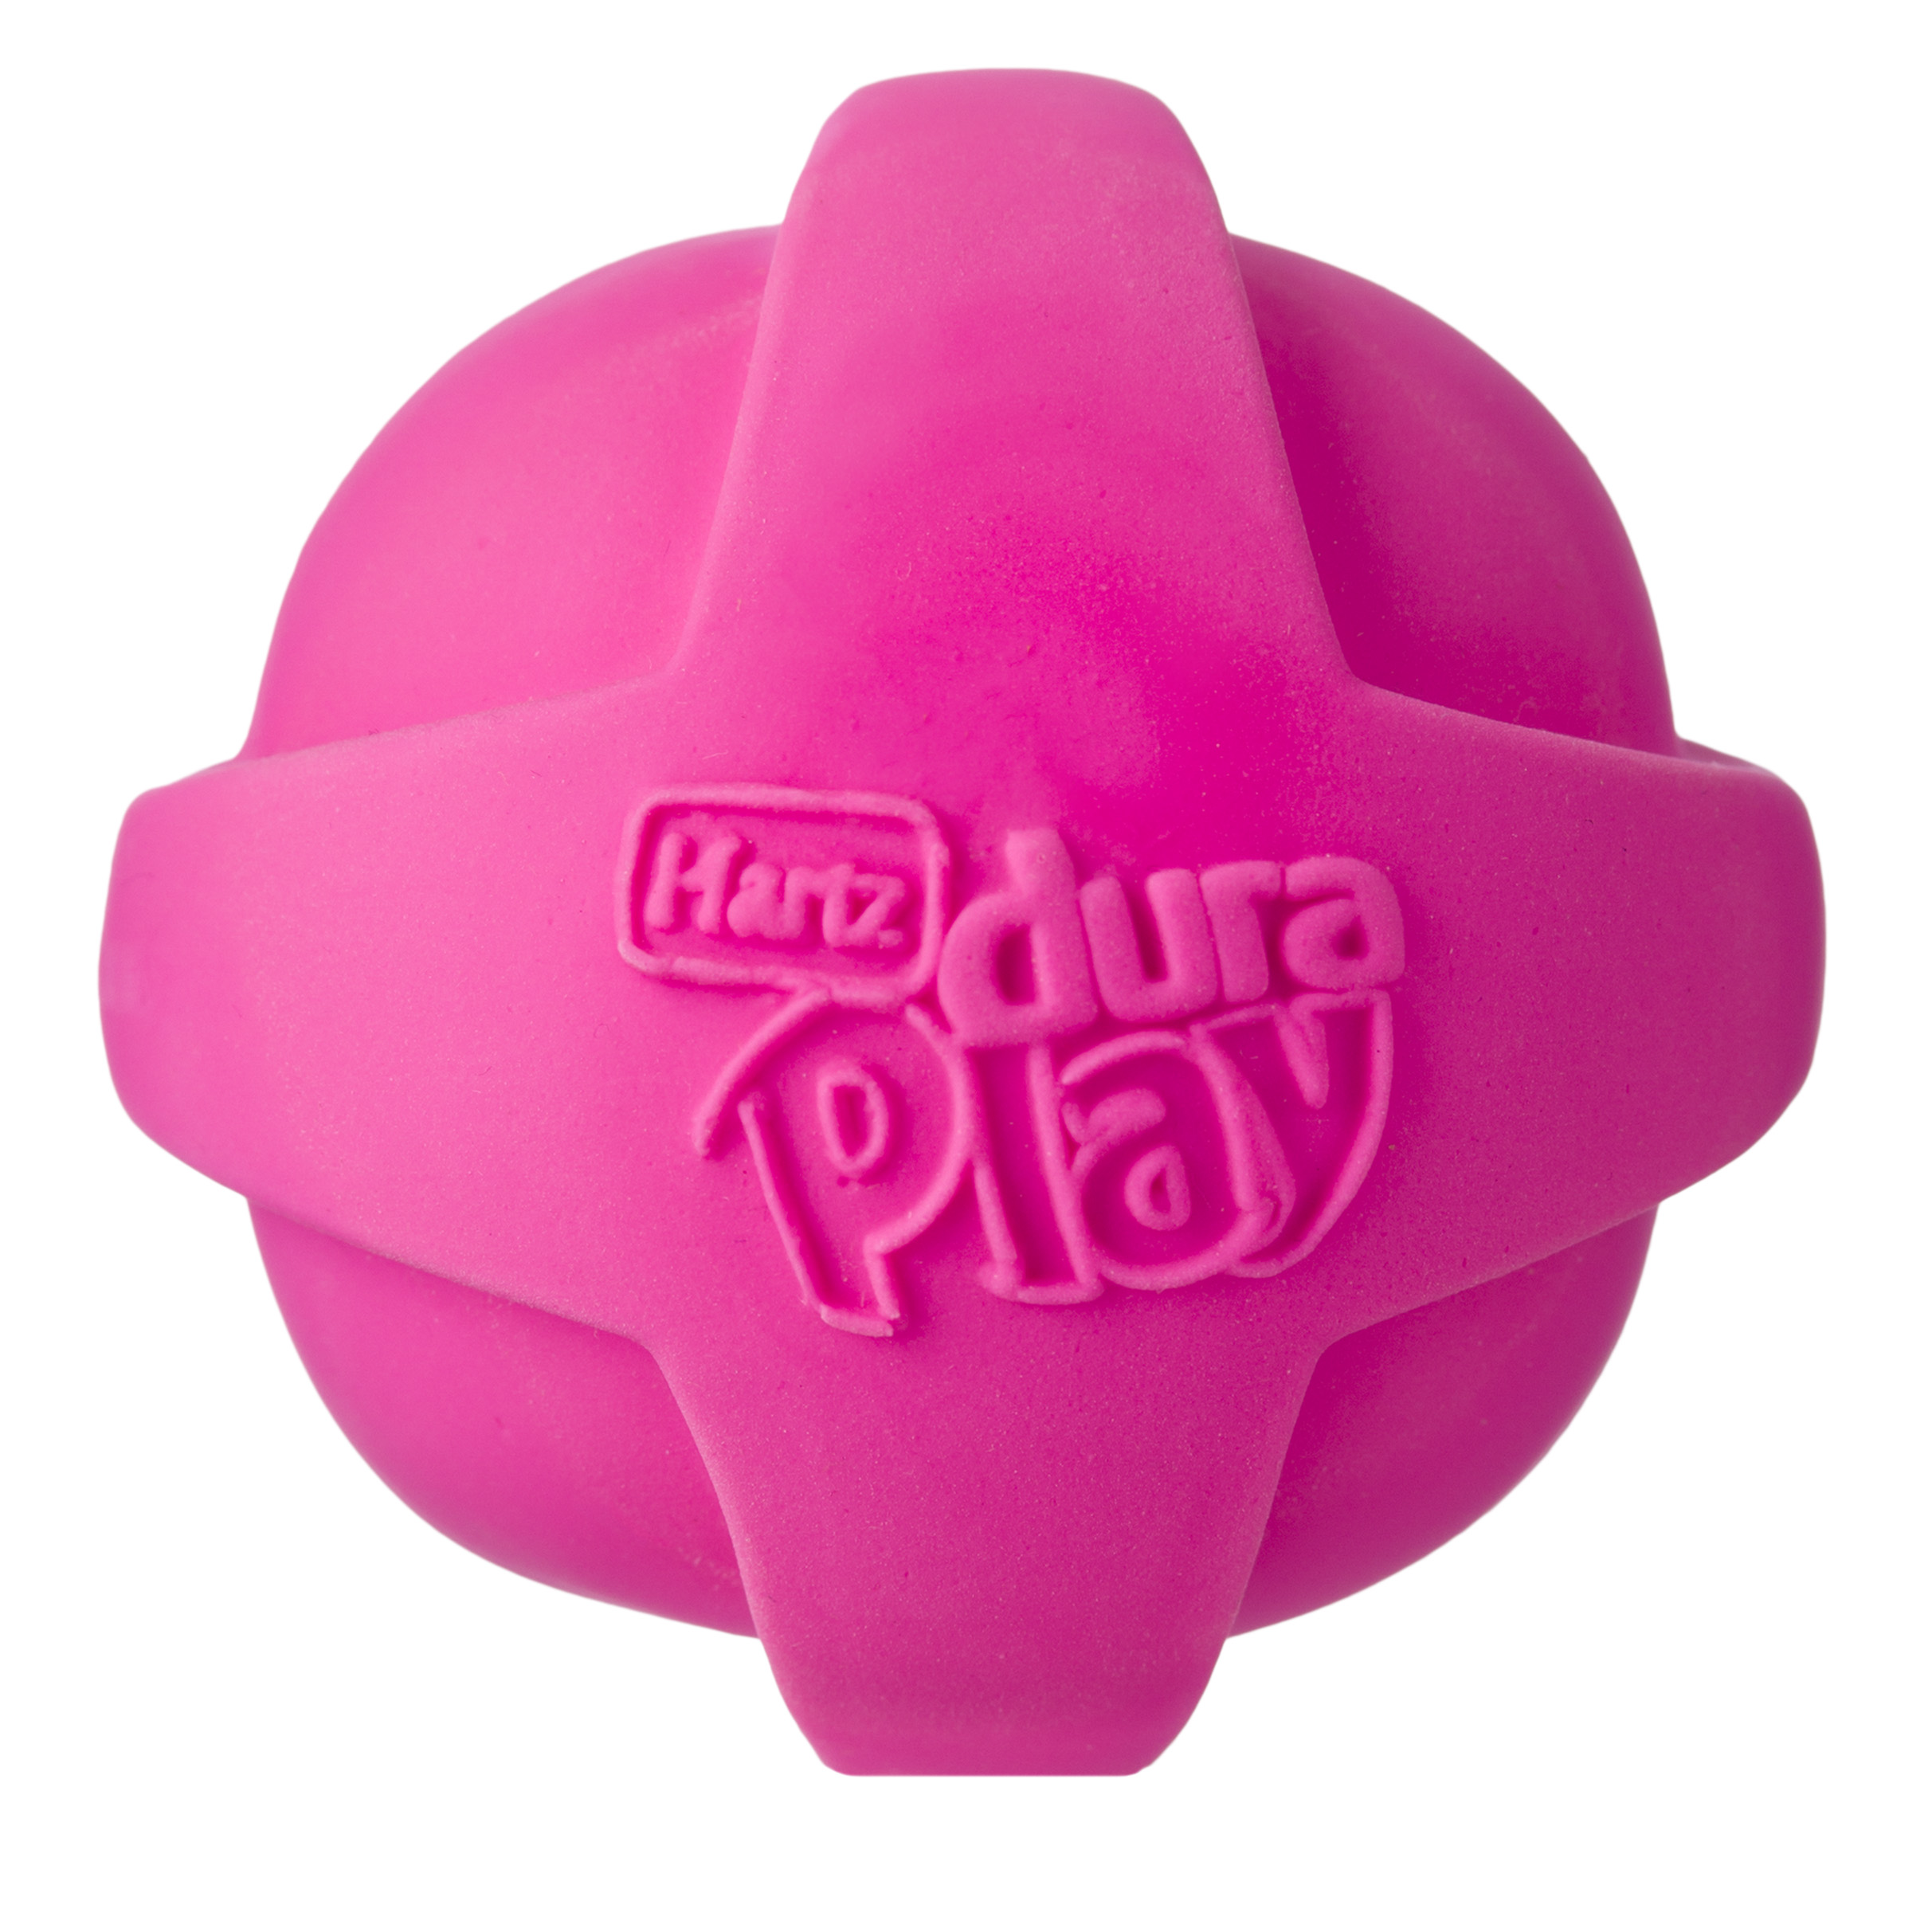 Hartz Dura Play Small Ball Dog Toy, 1ct - image 1 of 9